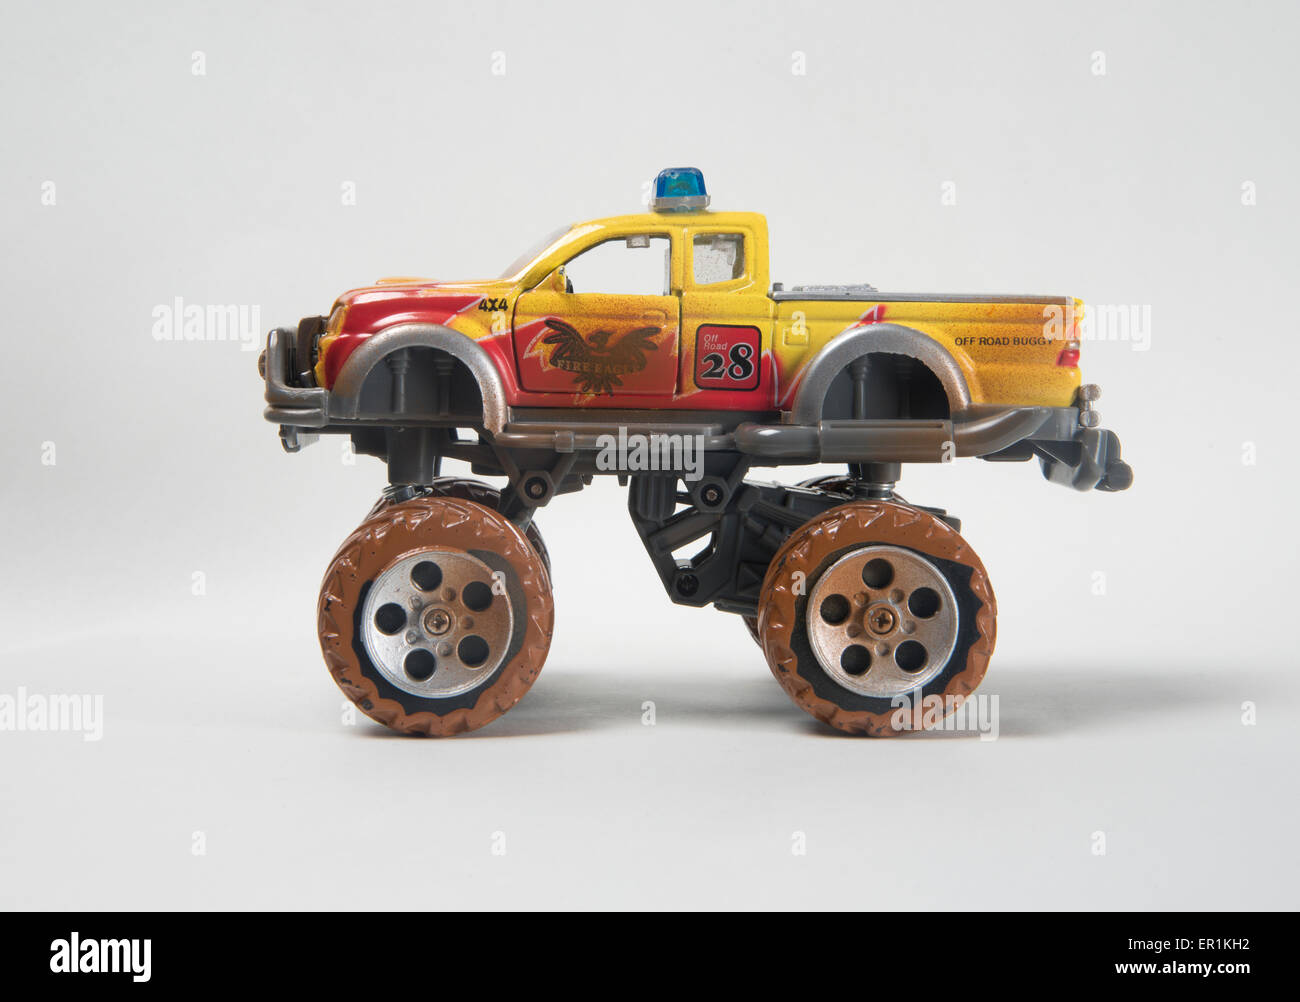 Toy monster truck Stock Photo